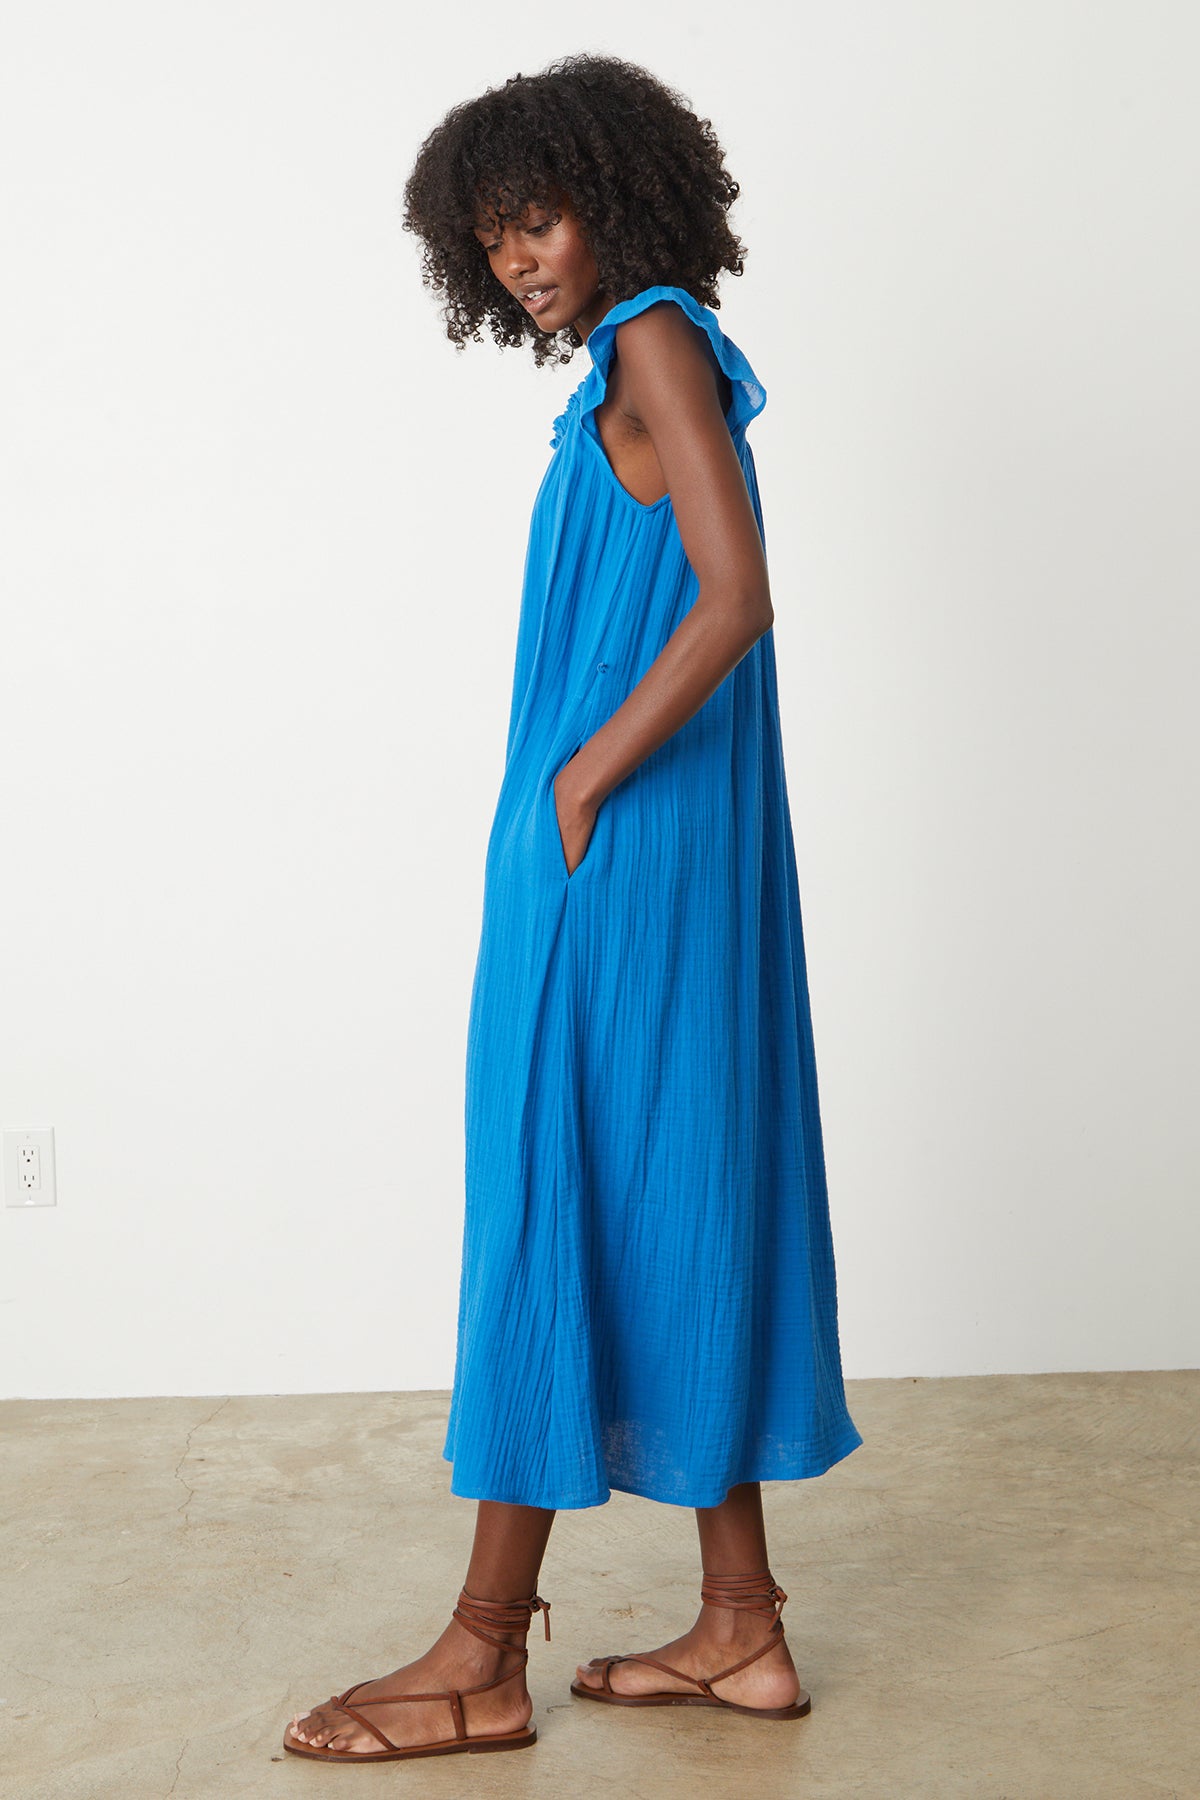 A woman wearing a Velvet by Graham & Spencer blue Justine Cotton Gauze Midi Dress and sandals.-26342712934593